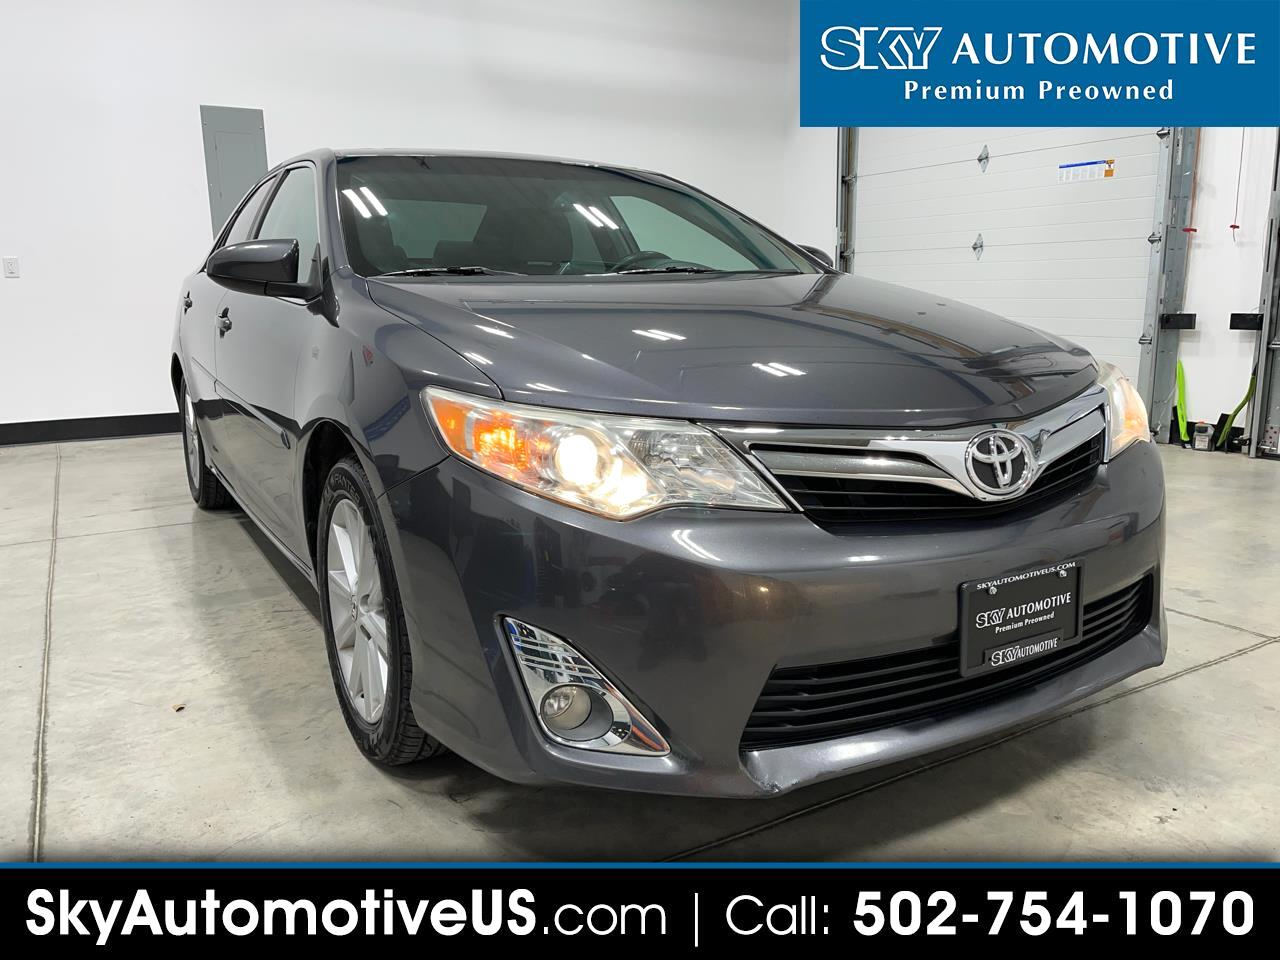 Toyota Camry 2014.5 4dr Sdn I4 Auto XLE (Natl) 2014